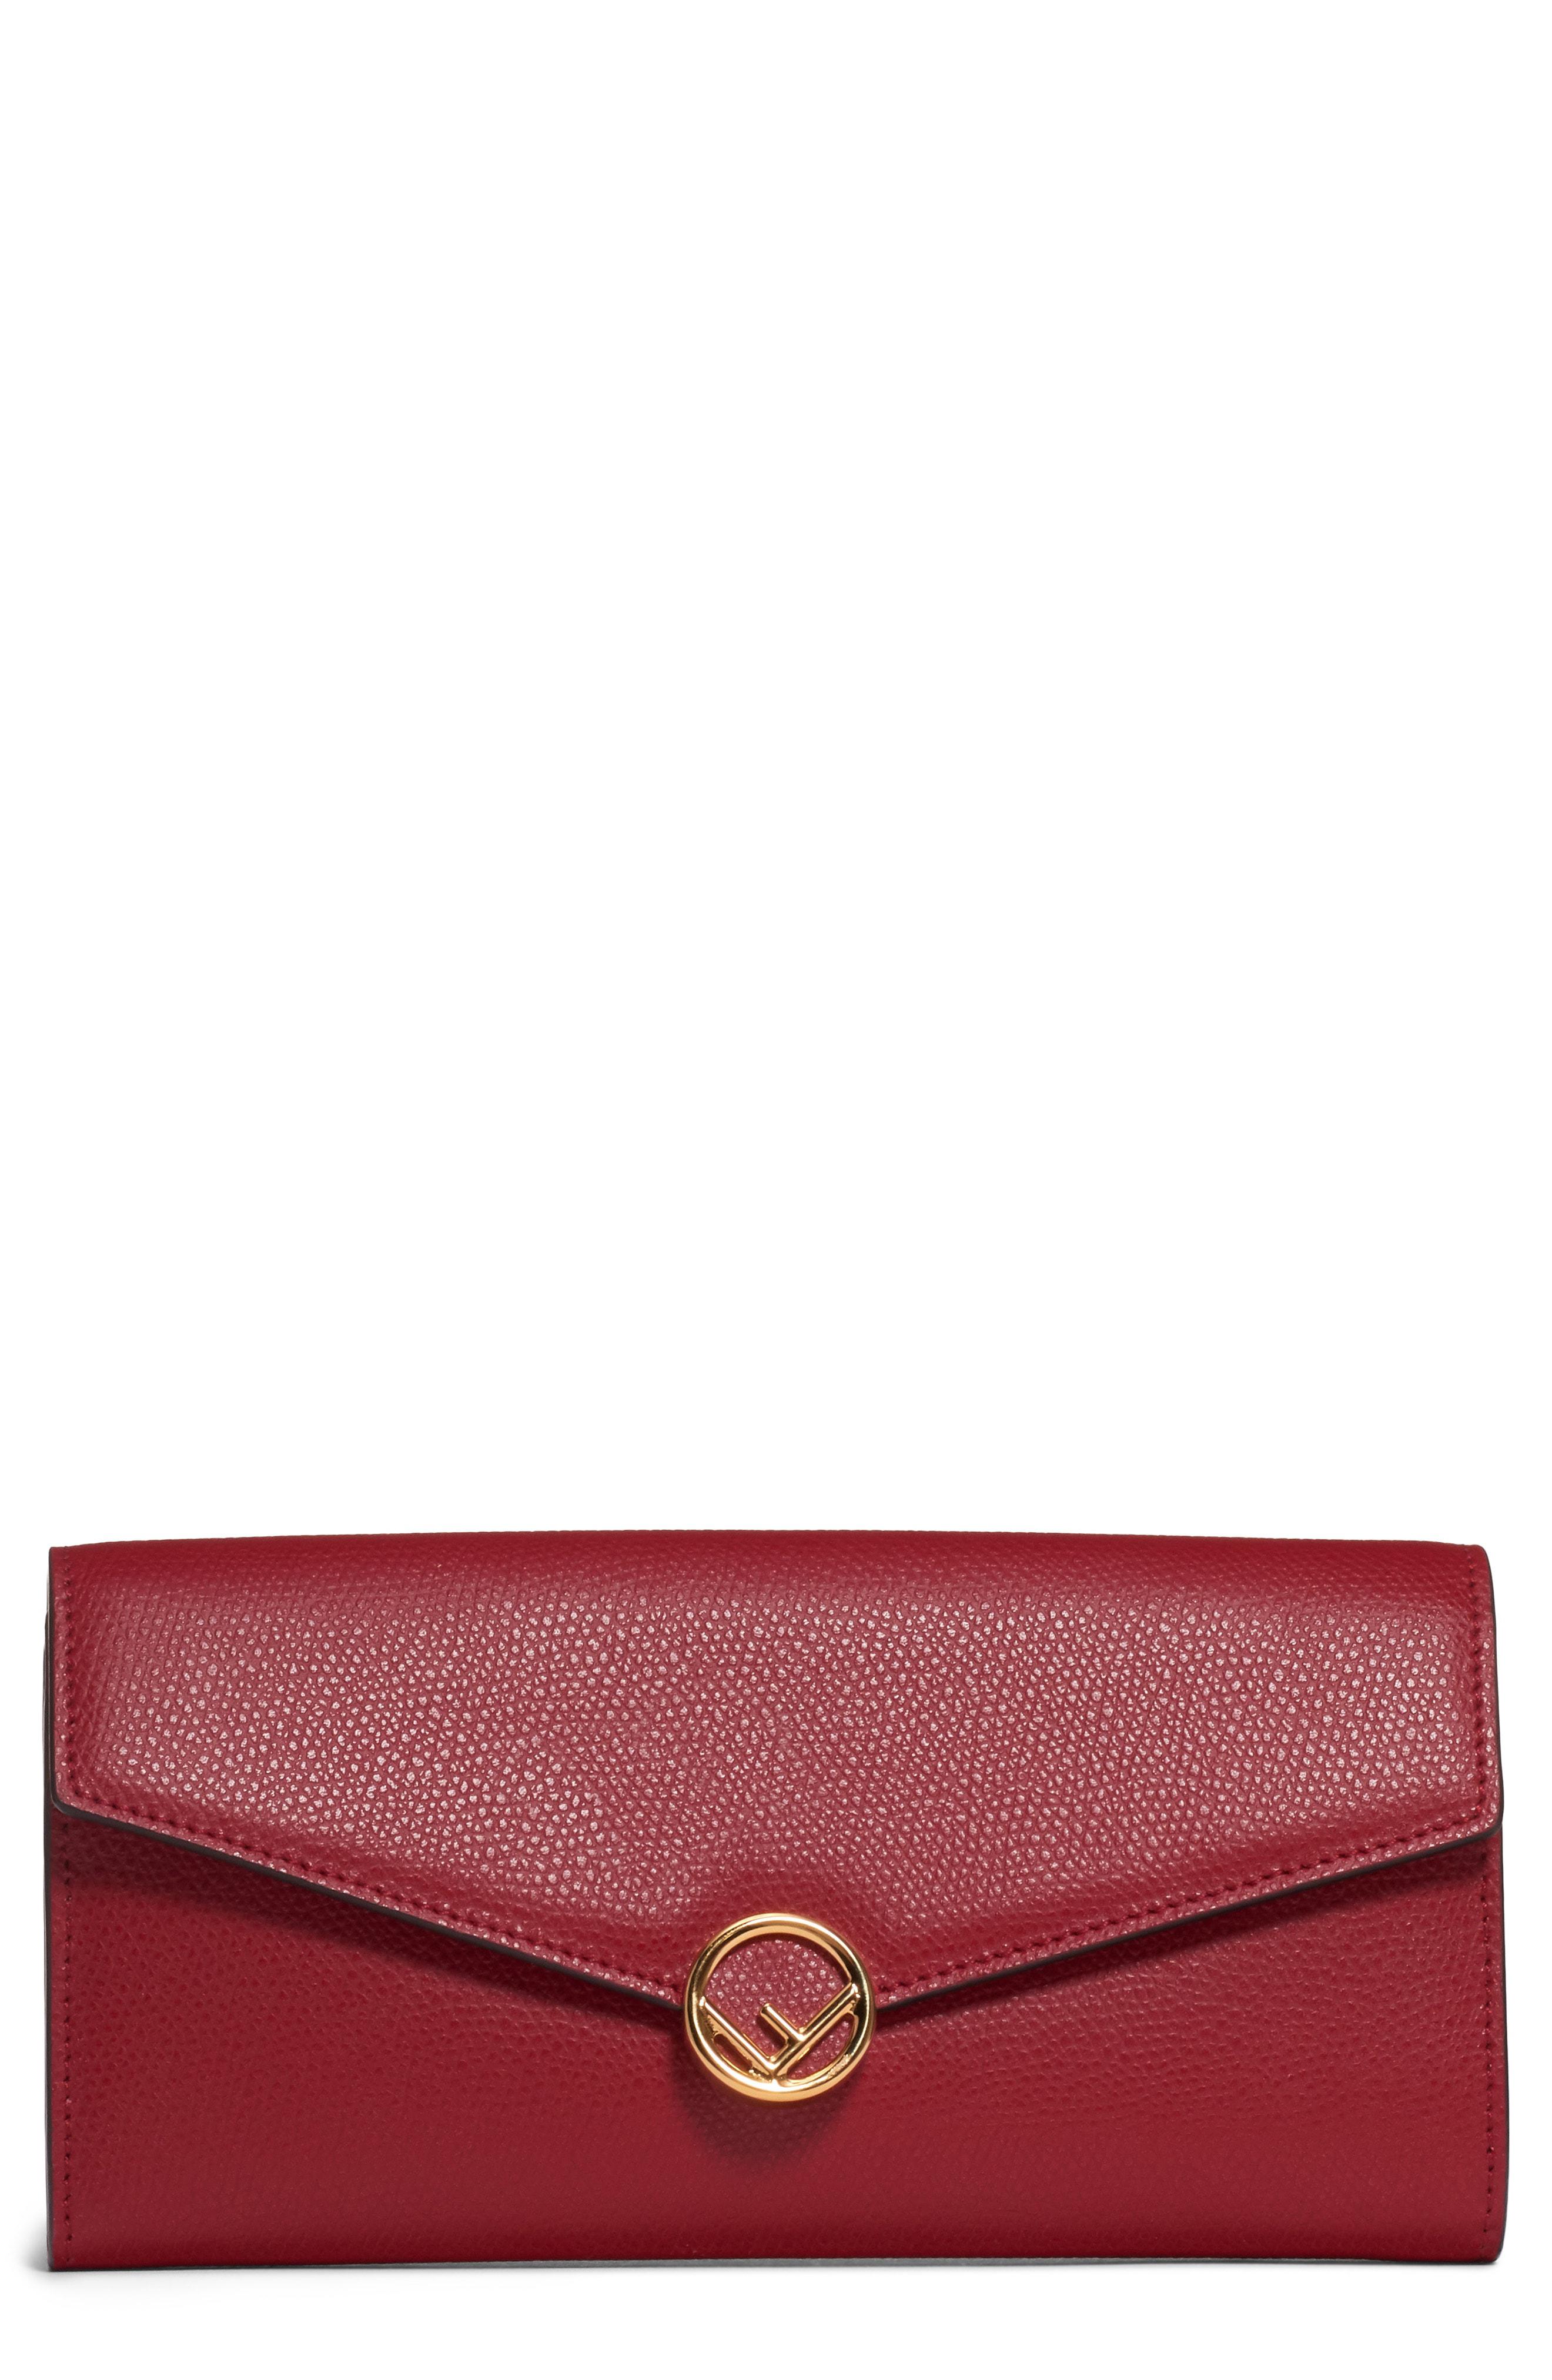 Lyst - Fendi Logo Calfskin Leather Continental Wallet On A Chain in Red